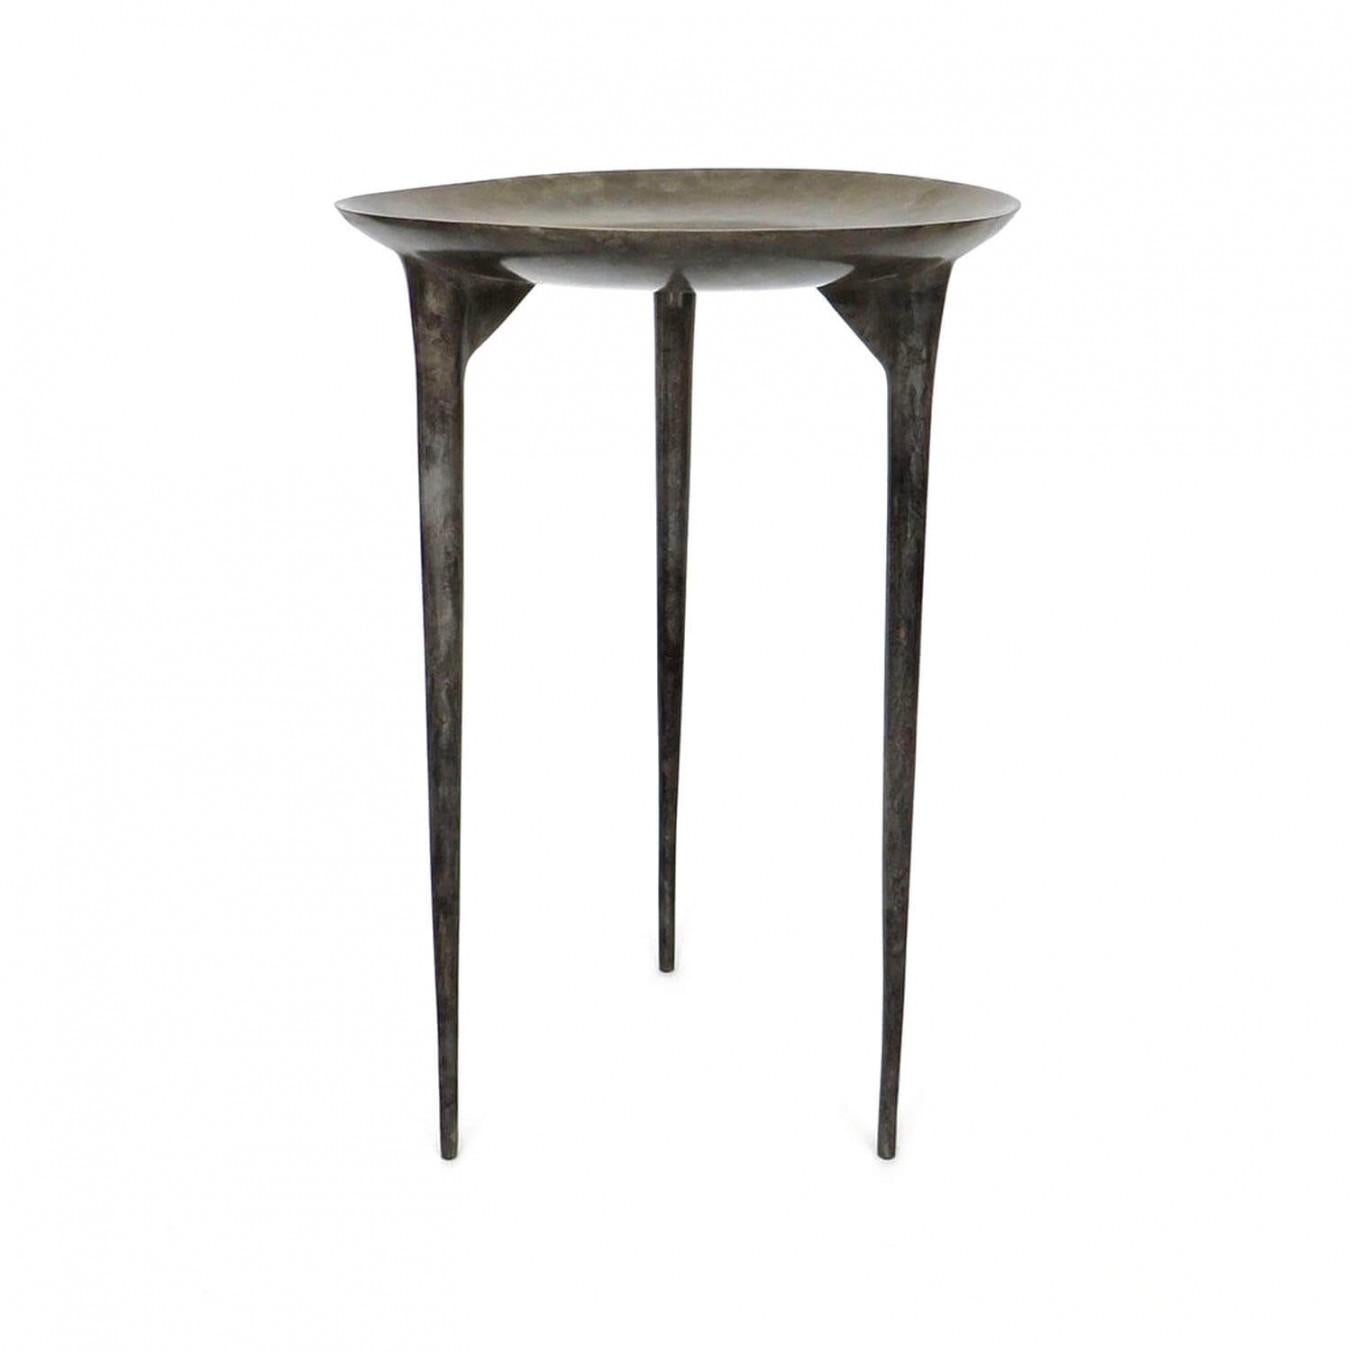 Contemporary bronze side table - Low Brazier by Rick Owens
2007
Dimensions: Dimensions: L 42 x W 42 x H 59 cm
Materials: Bronze
Weight: 25 kg

Available in black finish or Nitrate (Dark Brown) finish.

Rick Owens is a California-born fashion